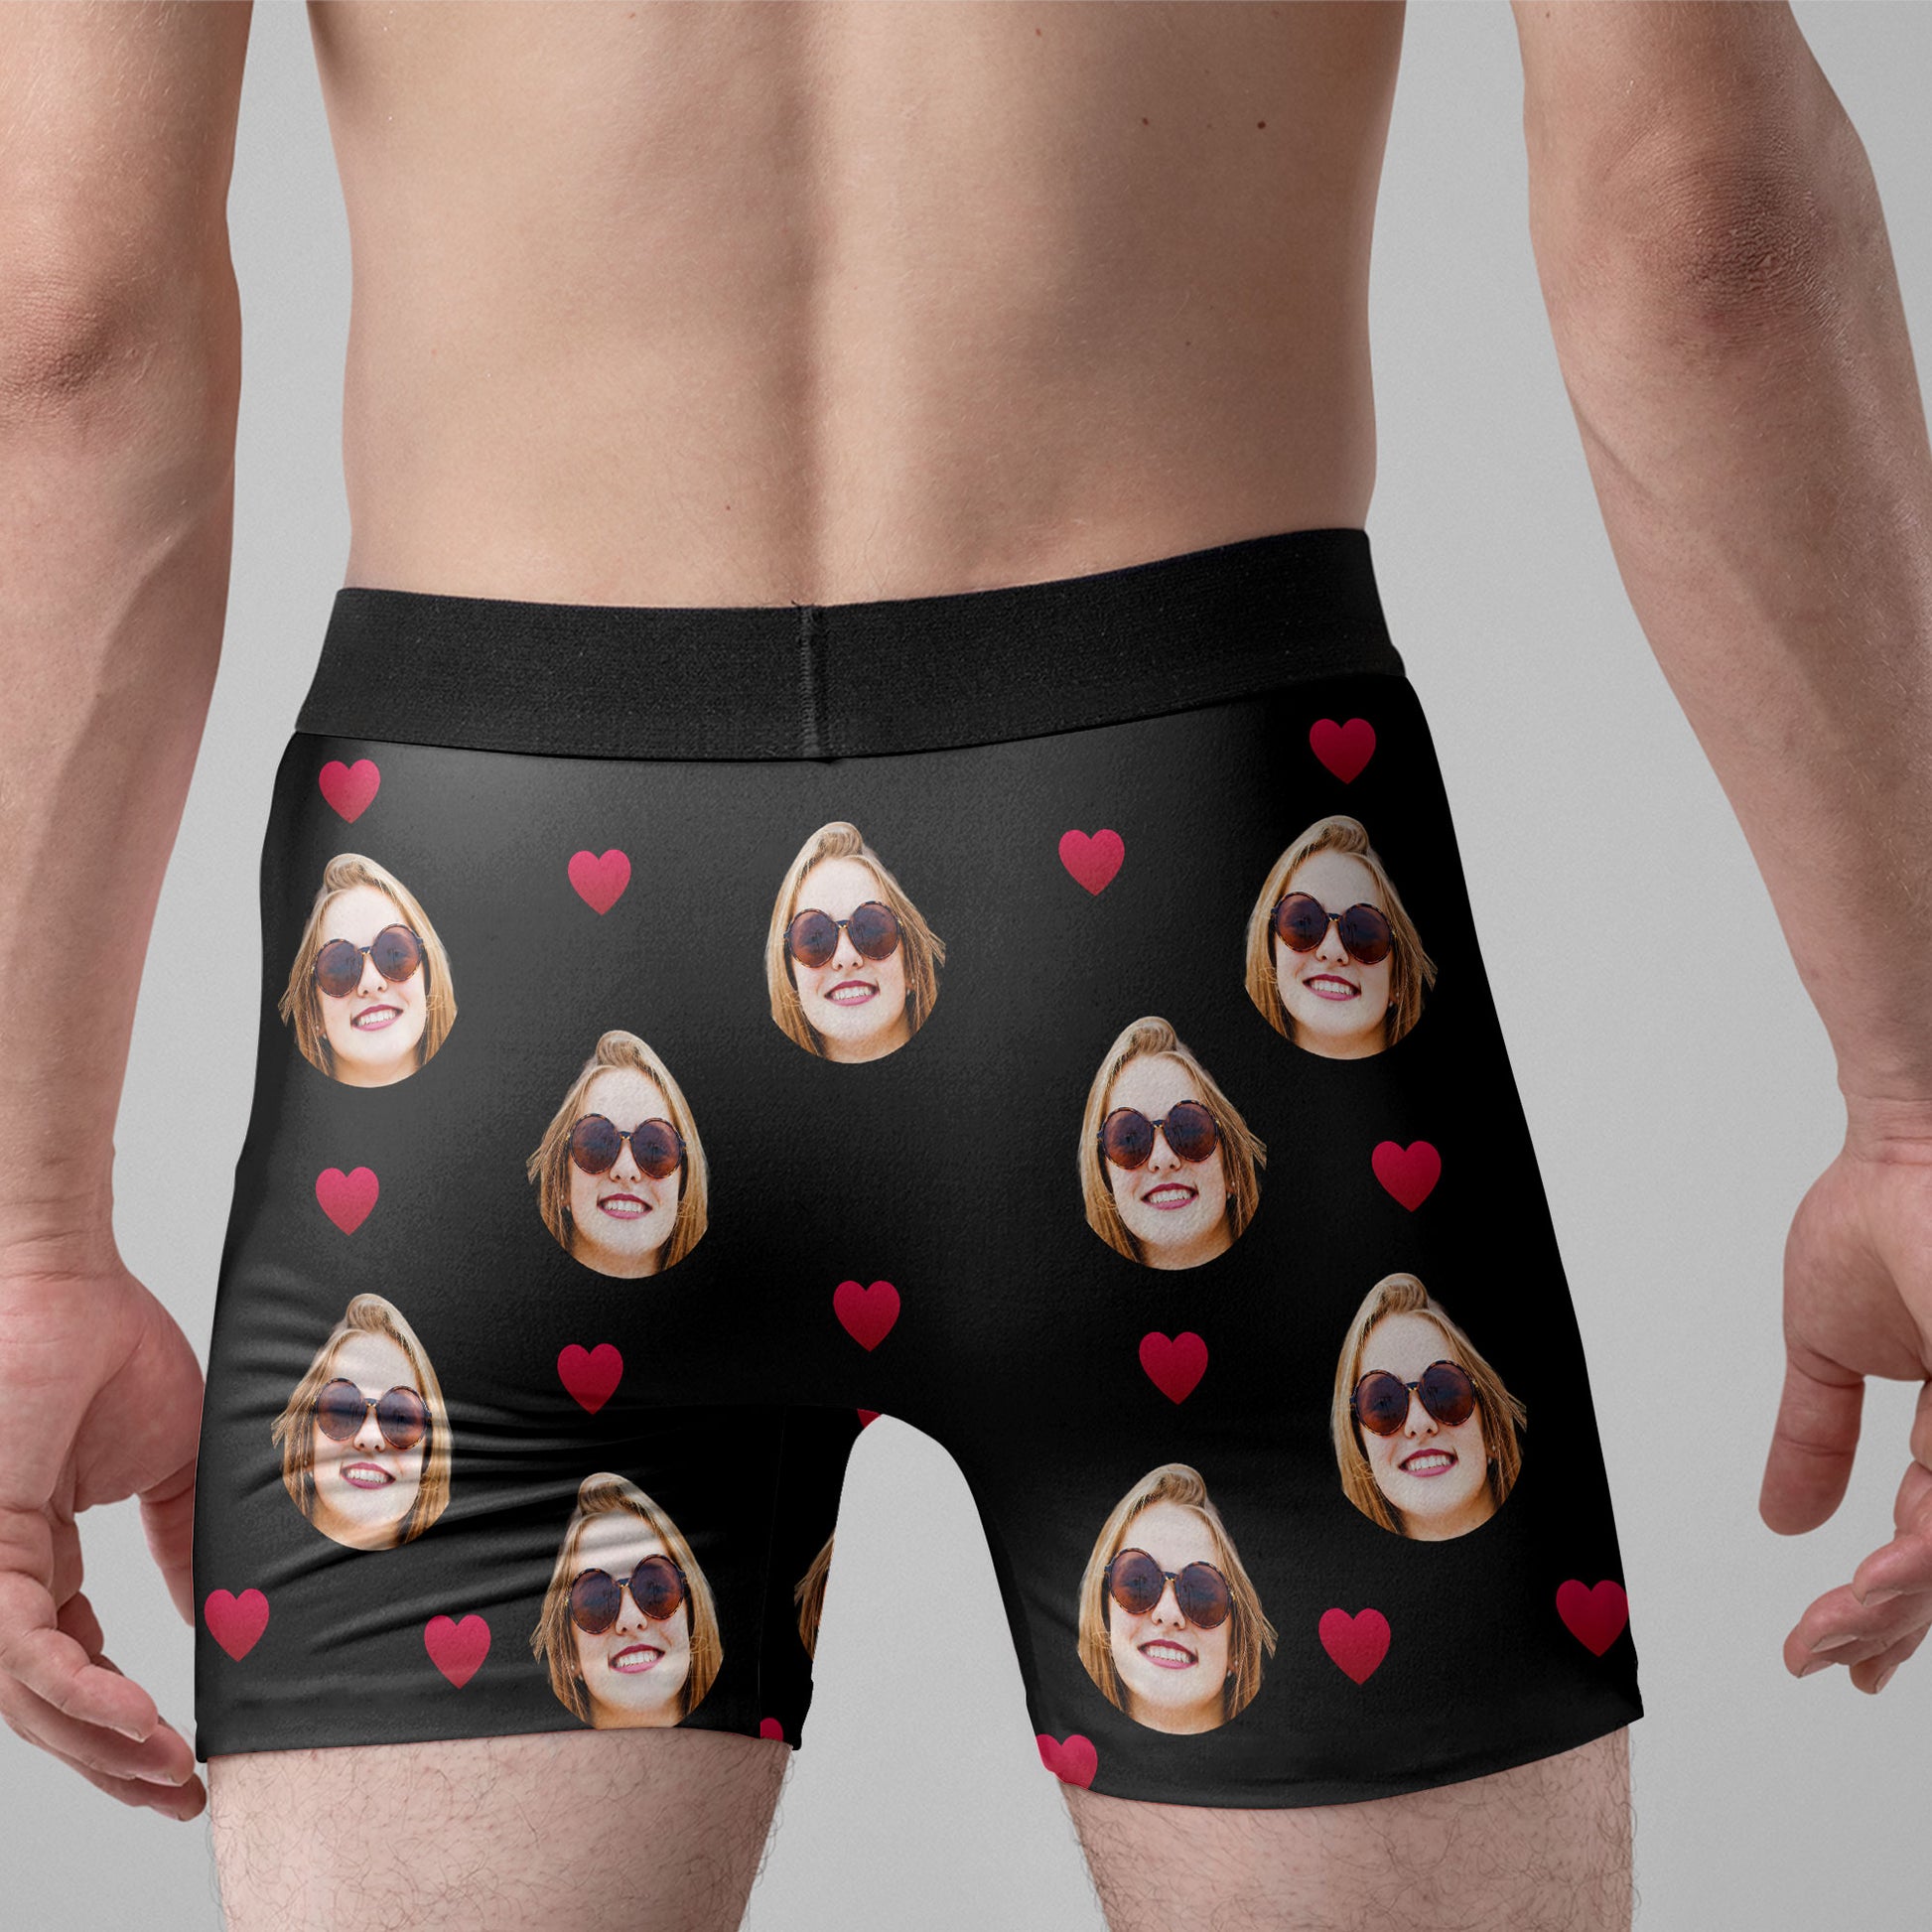 Personalised Boxer BRIEFS AWESOME GIFT Birthday Wedding